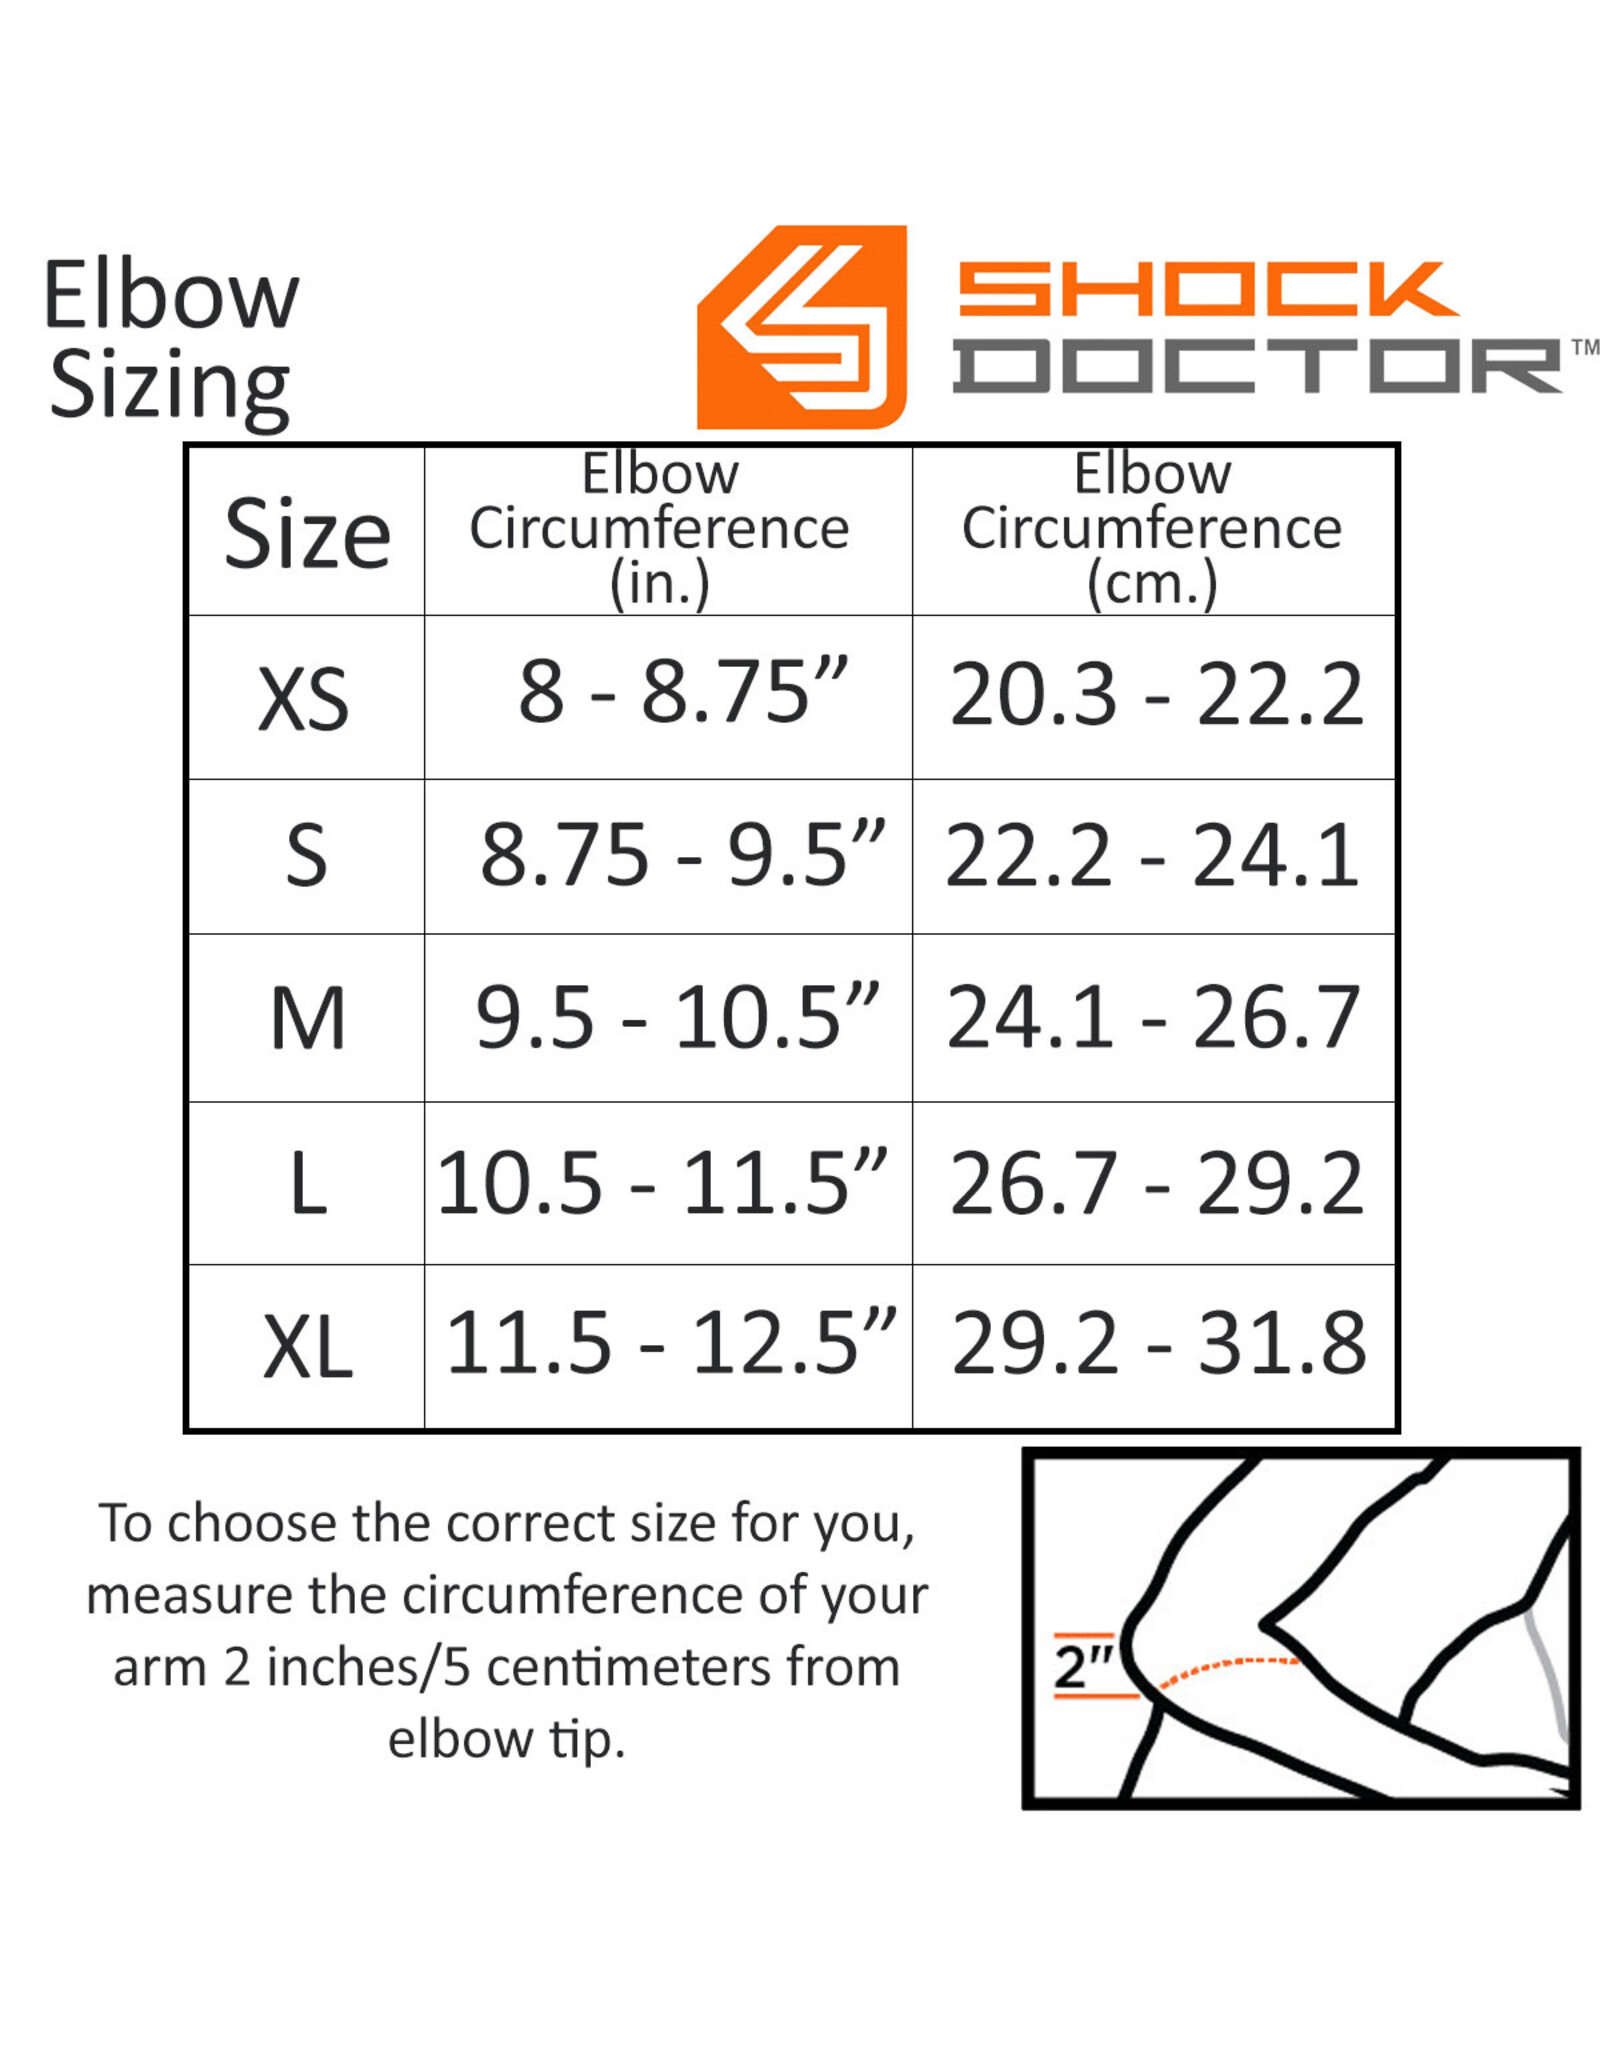 Shock Doctor 831 Elbow Compression Sleeve w/ Extended Coverage